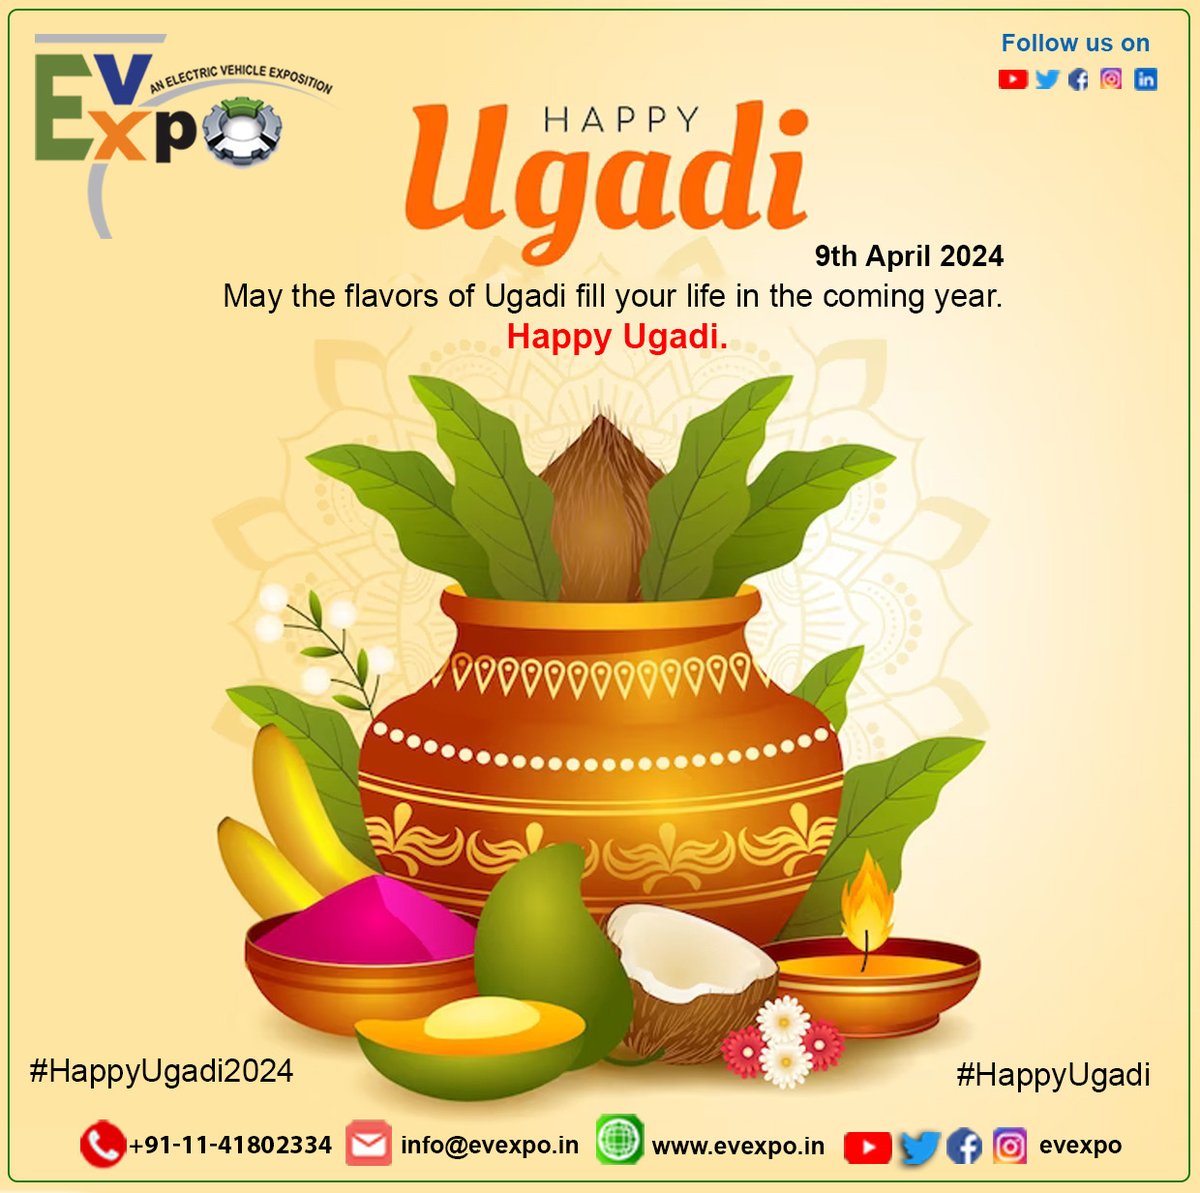 🌟 Happy Ugadi from EvExpo! 🎉 As the sun enters a new zodiac sign, let's embrace fresh beginnings and renewable energy. Just like the vibrant colors of rangoli, let's paint our future with sustainable solutions for a greener tomorrow. 

#happyugadi2024  #ElectricFuture 🌱🚗✨